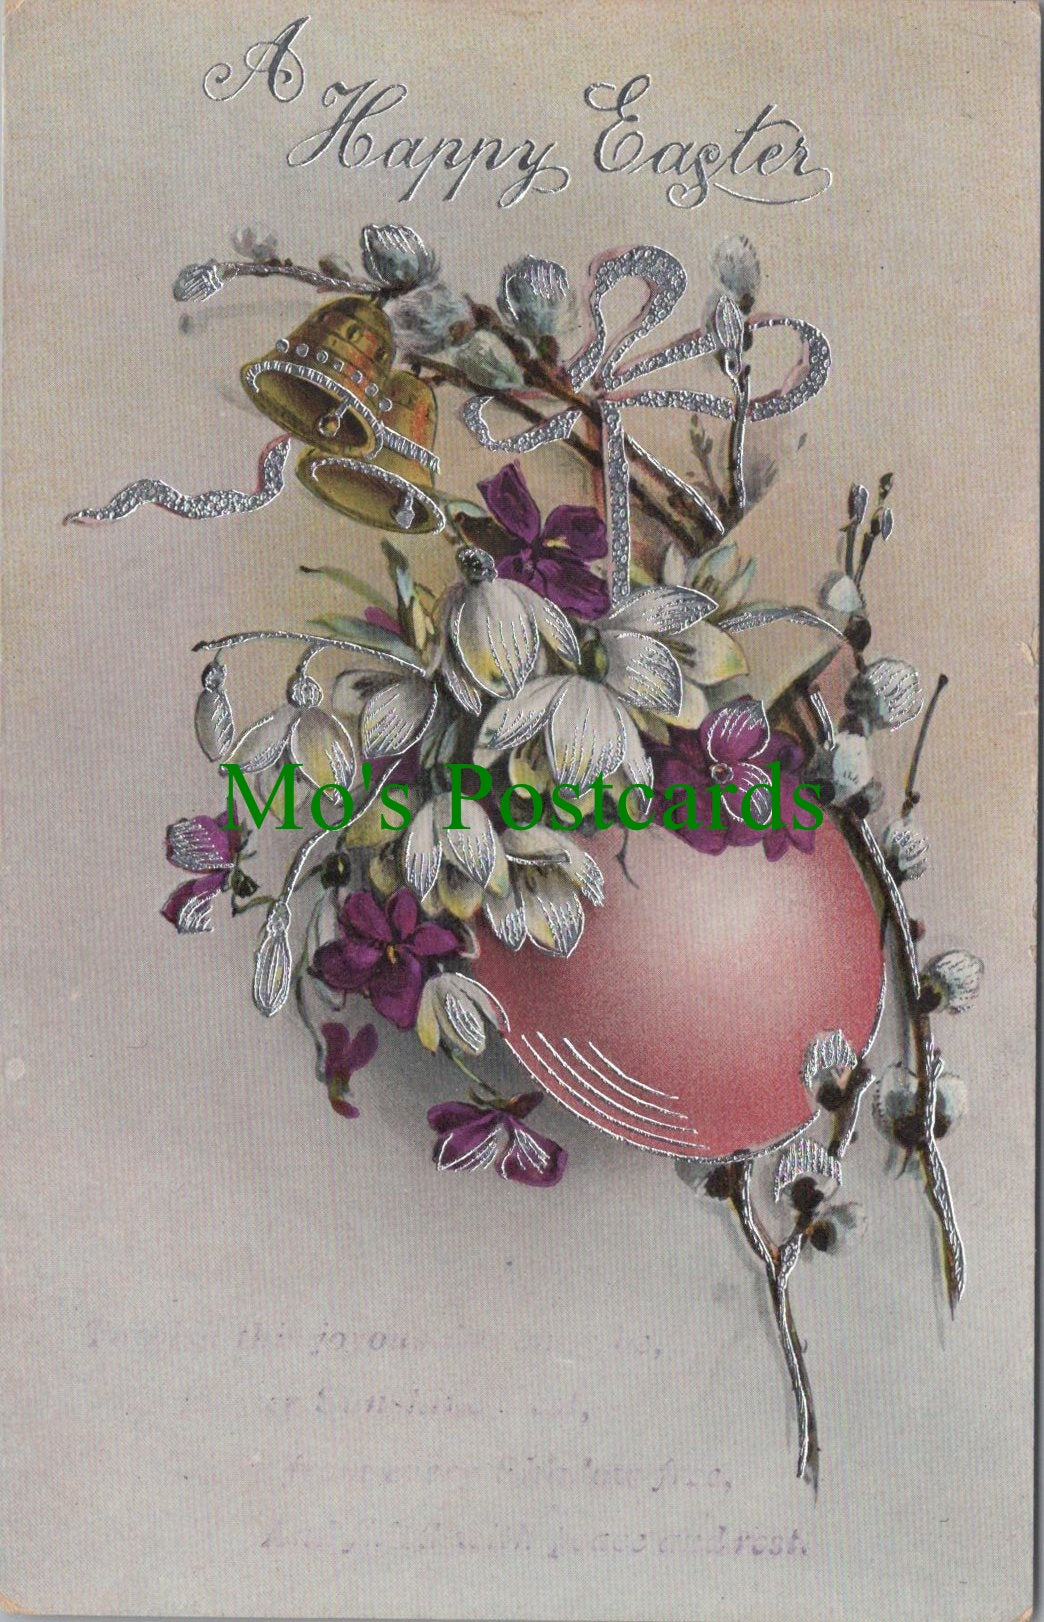 Greetings Postcard - A Happy Easter  SW12083